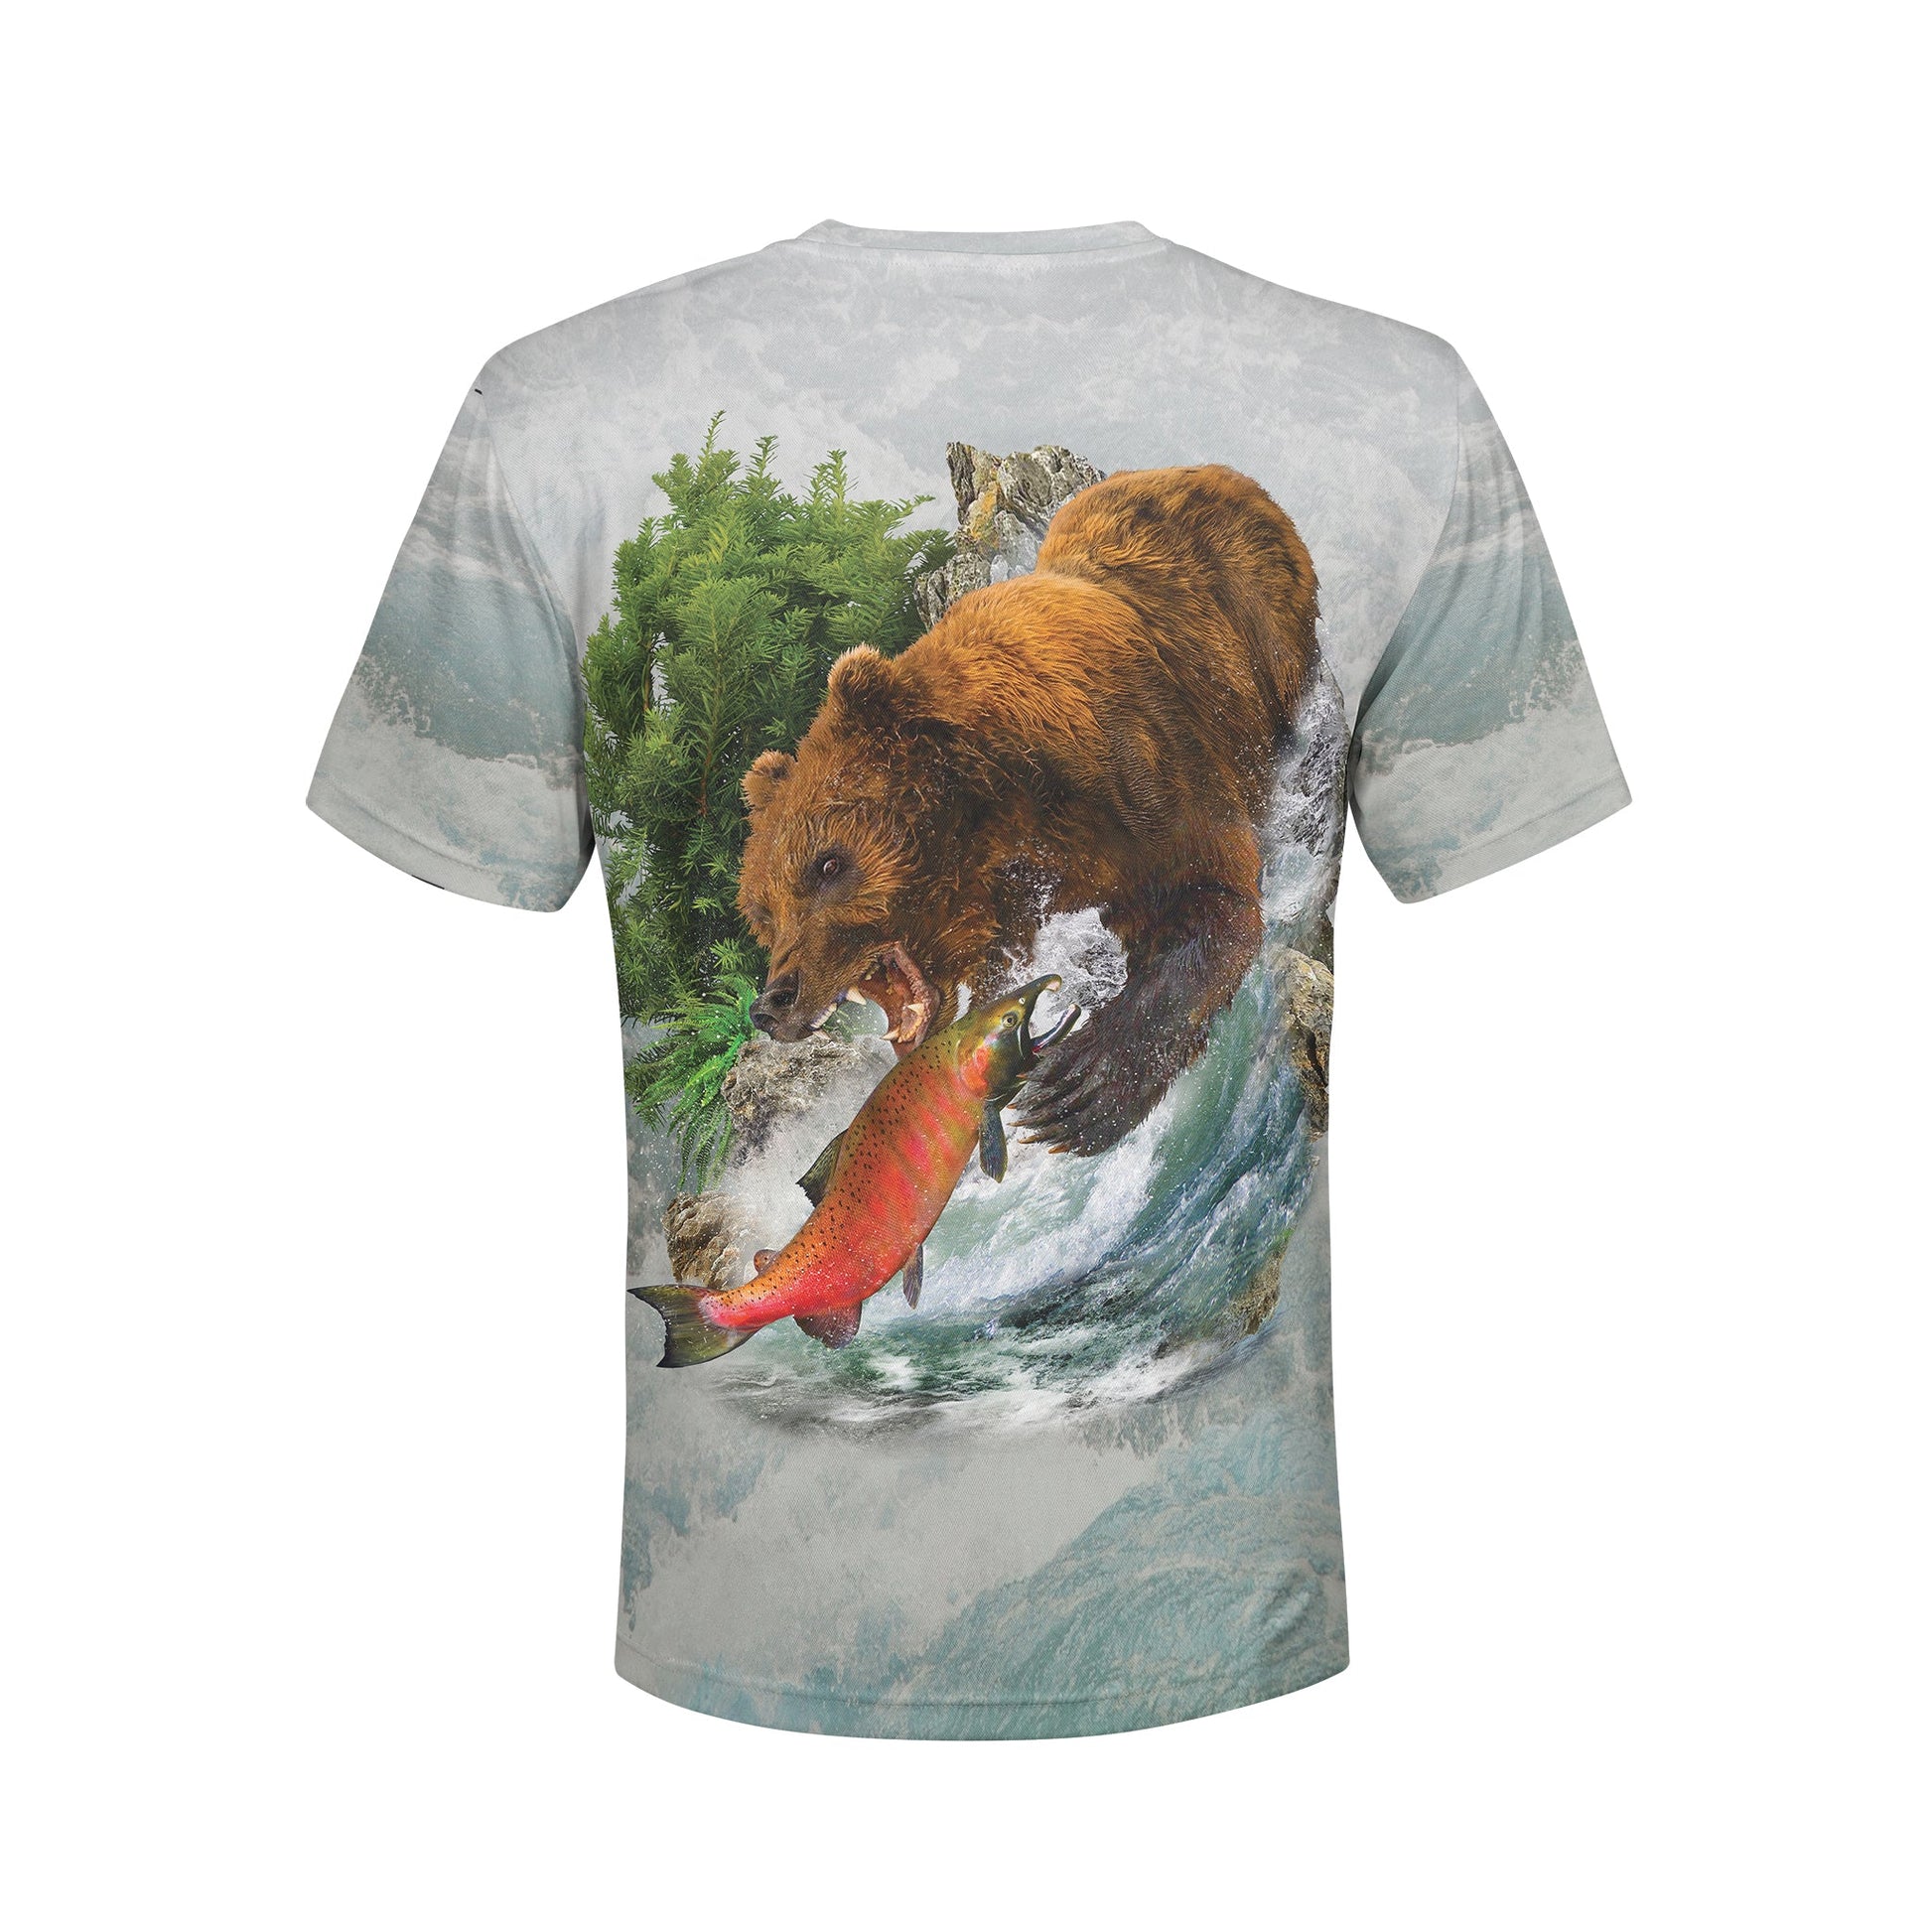 Grizzly & Salmon Wetlands Performance Apparel